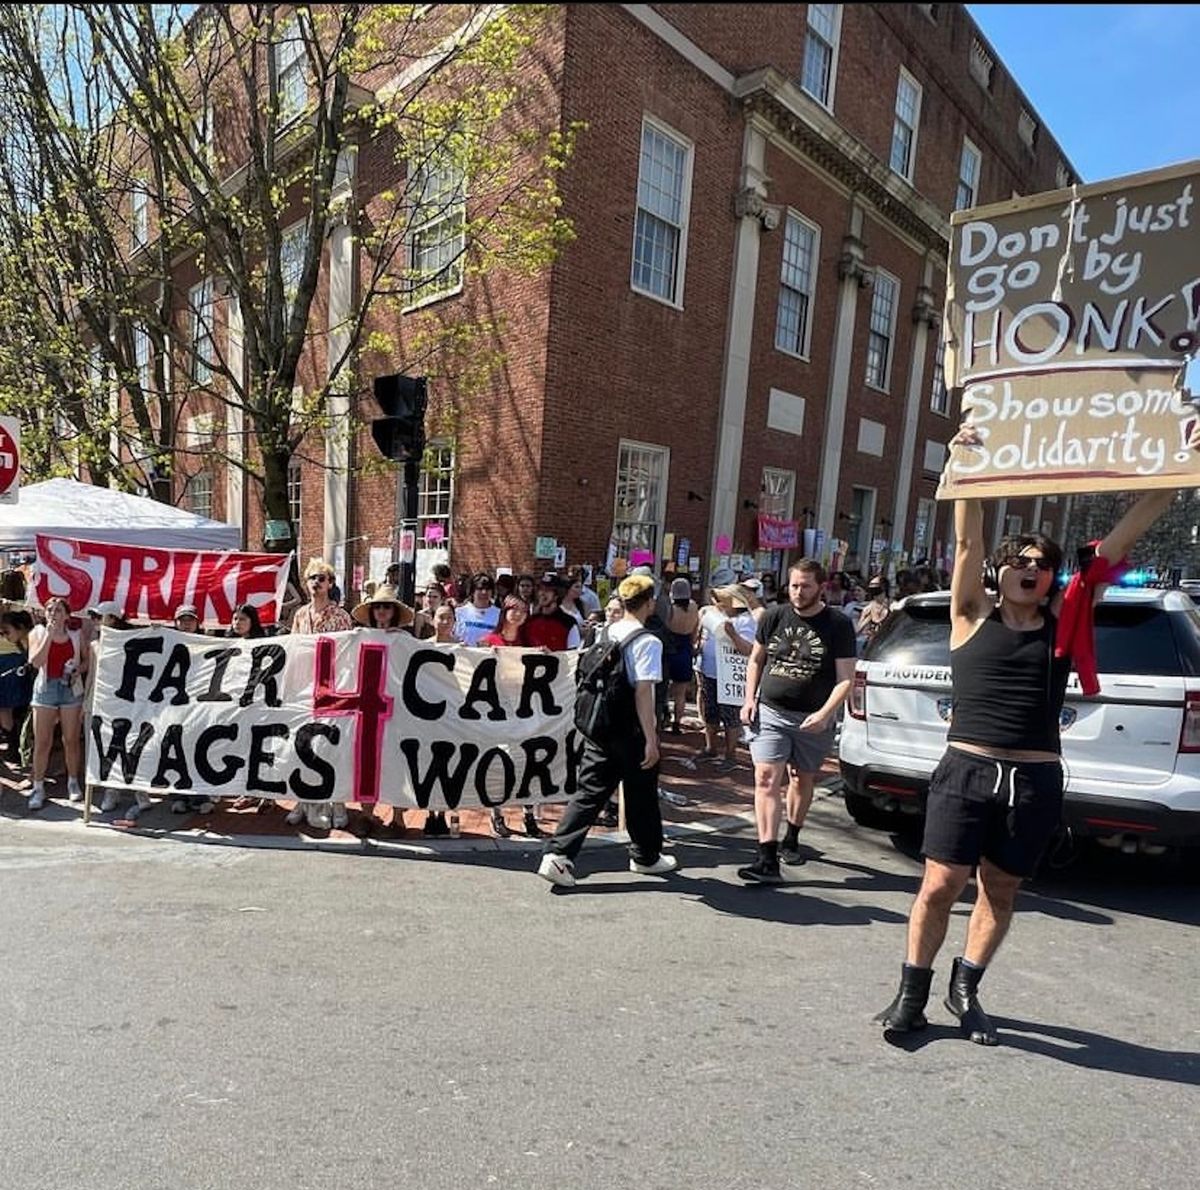 Students demonstrating in support of striking campus workers at the Rhode Island School of Design Courtesy of United Food and Commercial Workers Local 328